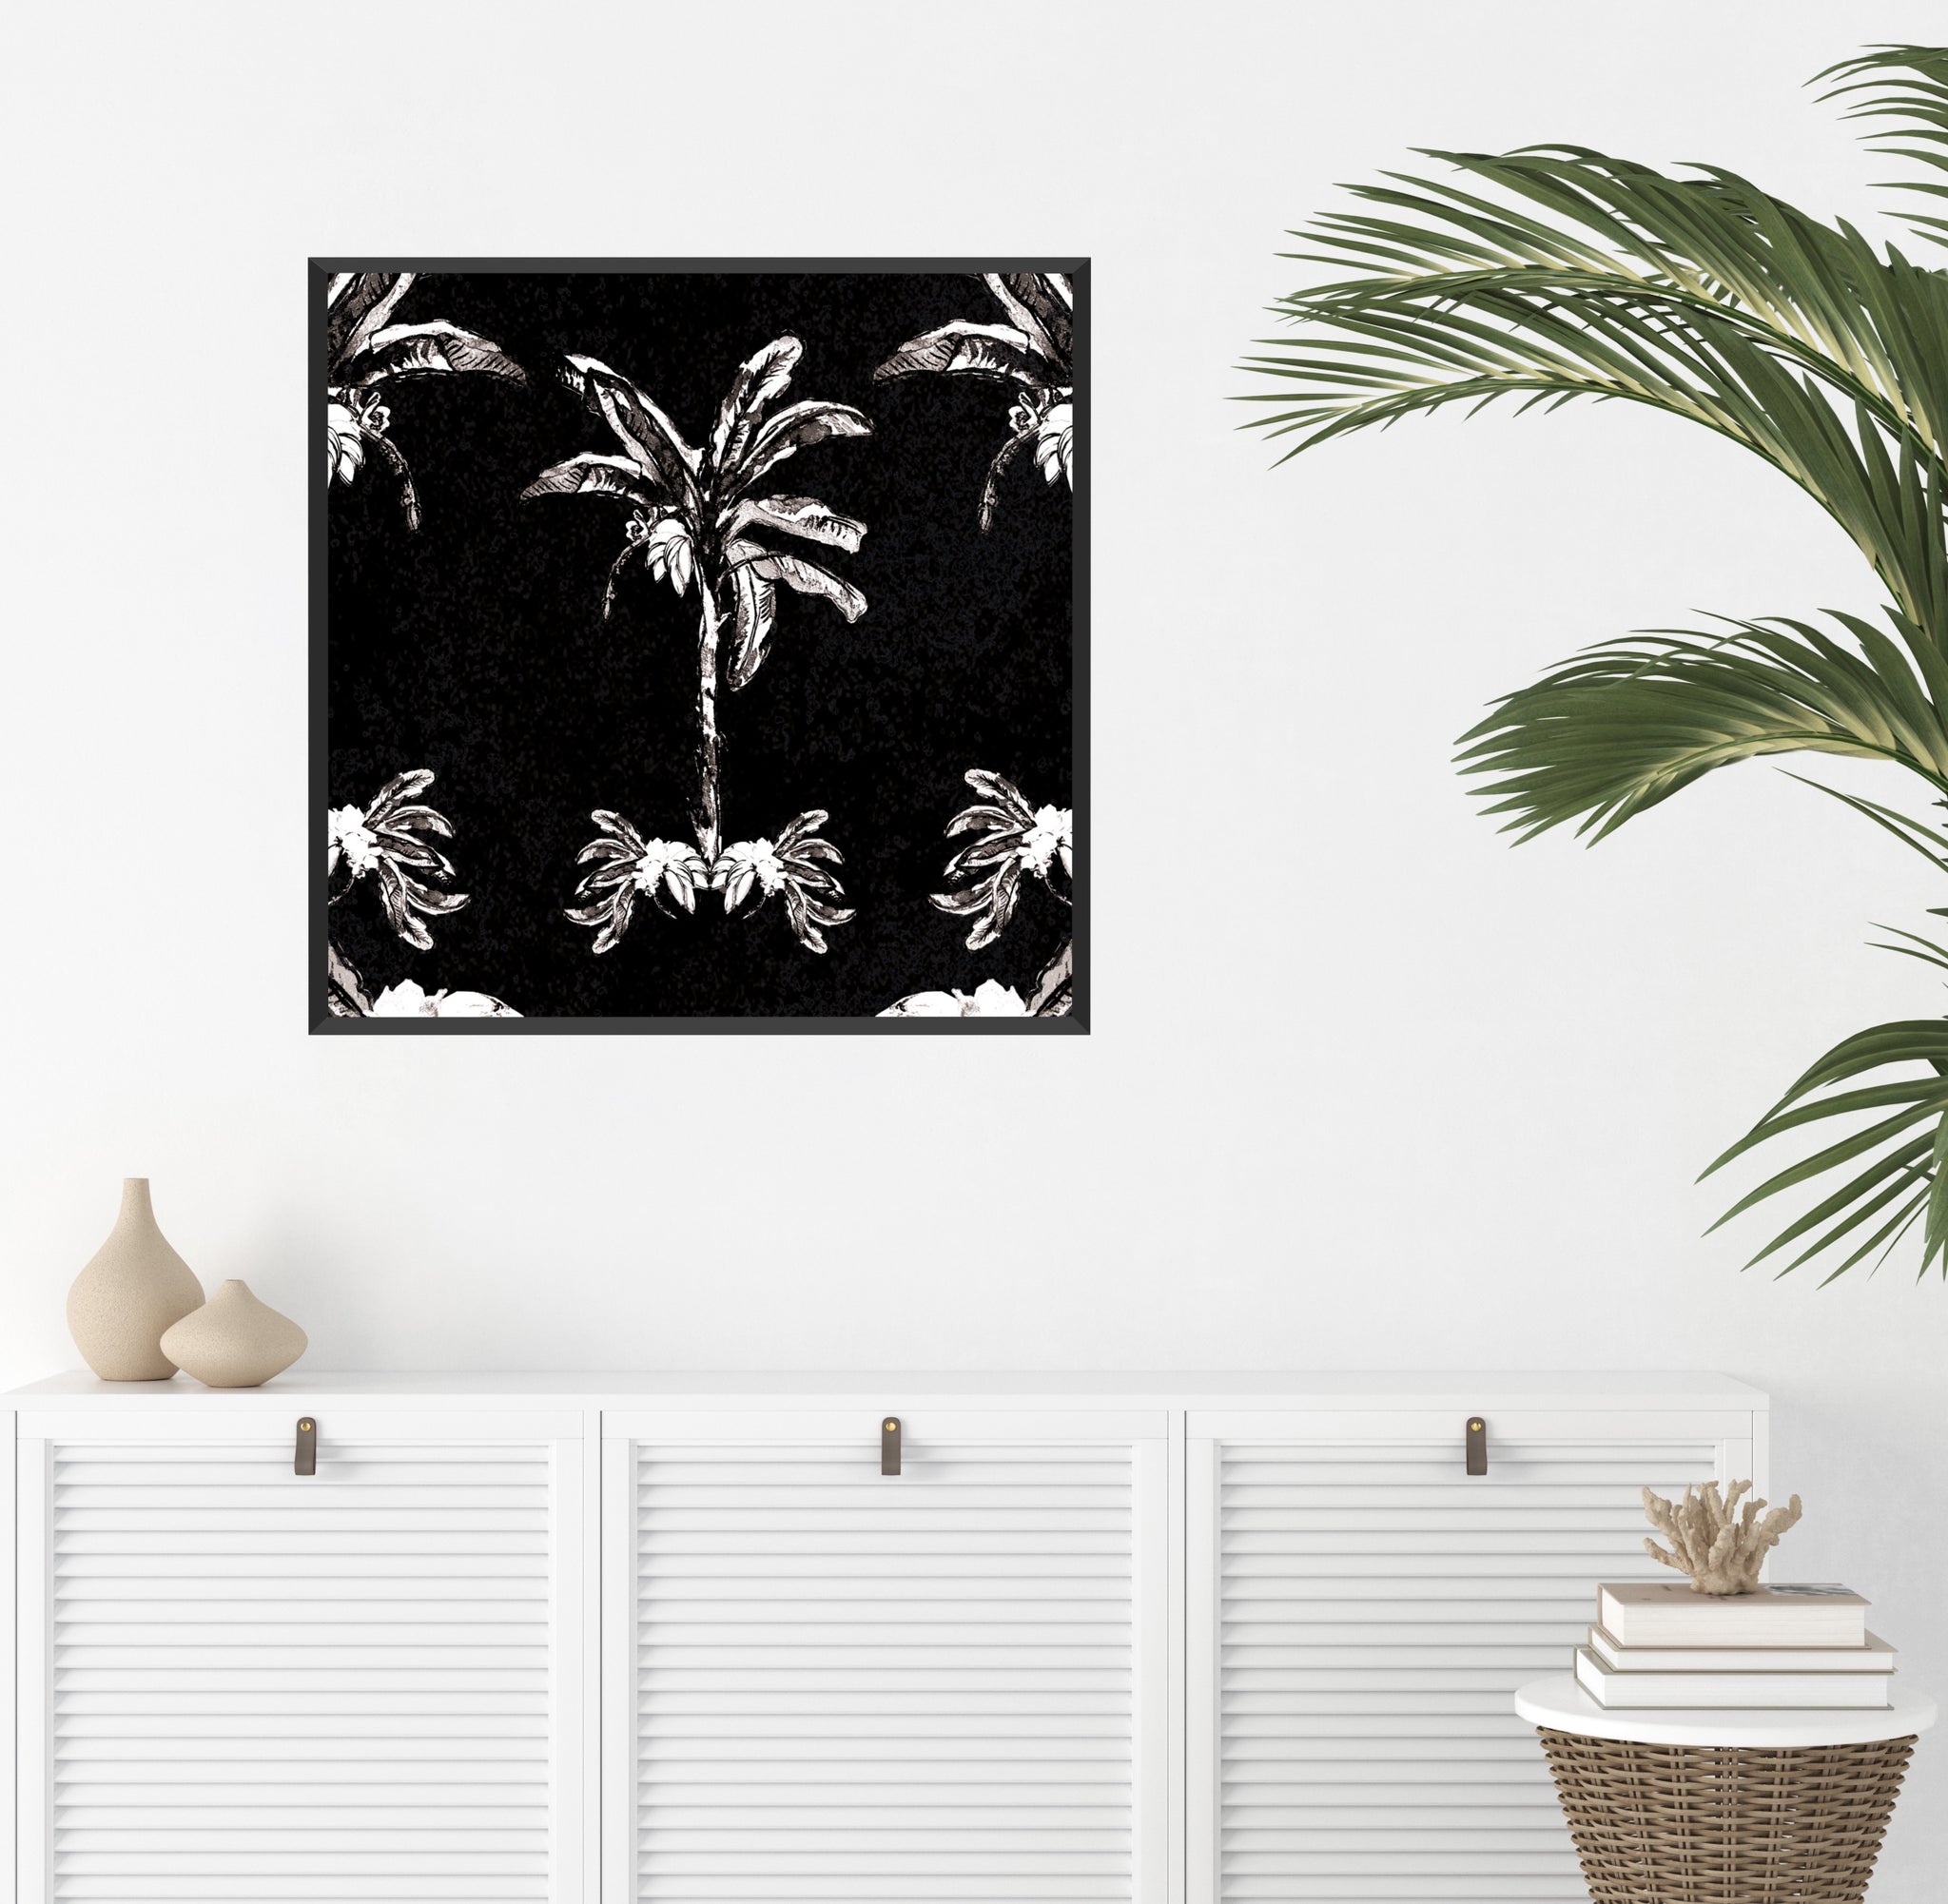 Banana Bungalow in Black Ink Canvas Print